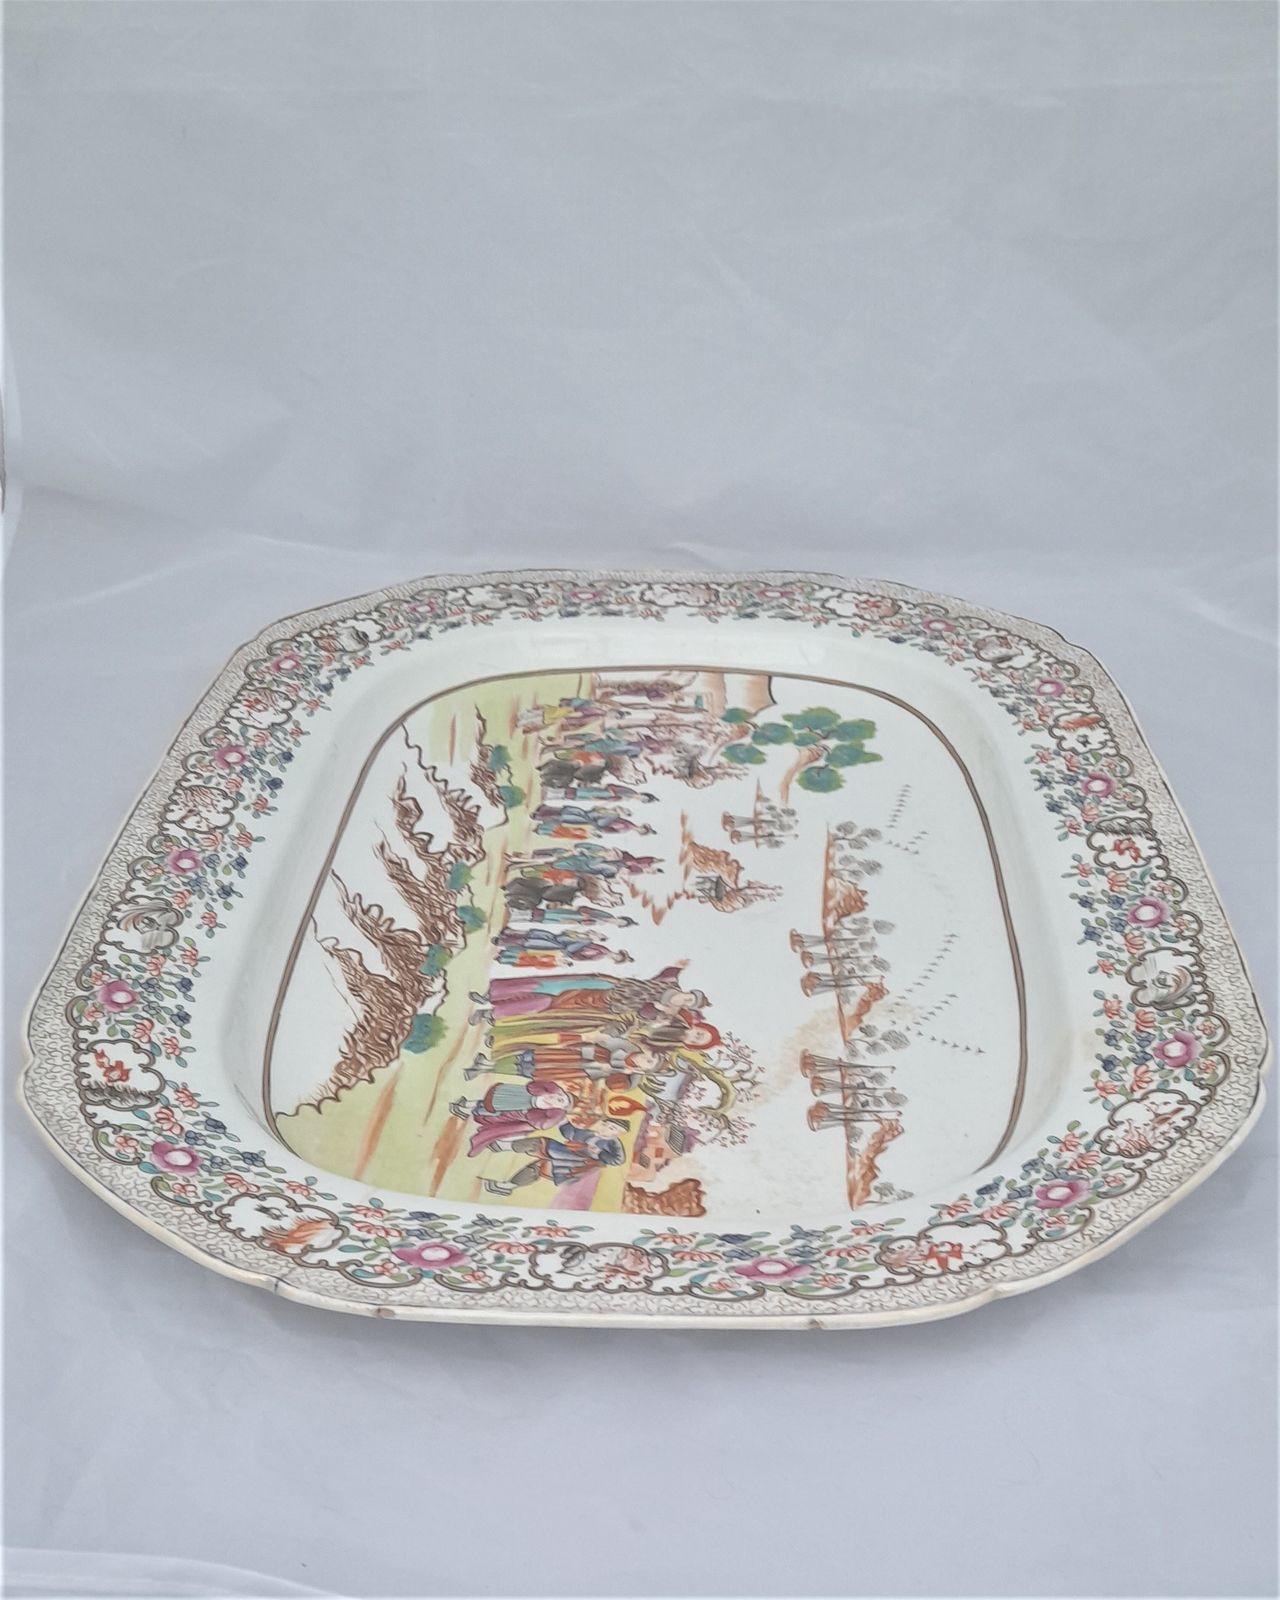 Large Antique Porcelain Platter Transferware Chinoiserie Harbour Scene pattern circa 1820 18th century Qing Chinese Style 56 cm long 41 cm wide 3.7 kg